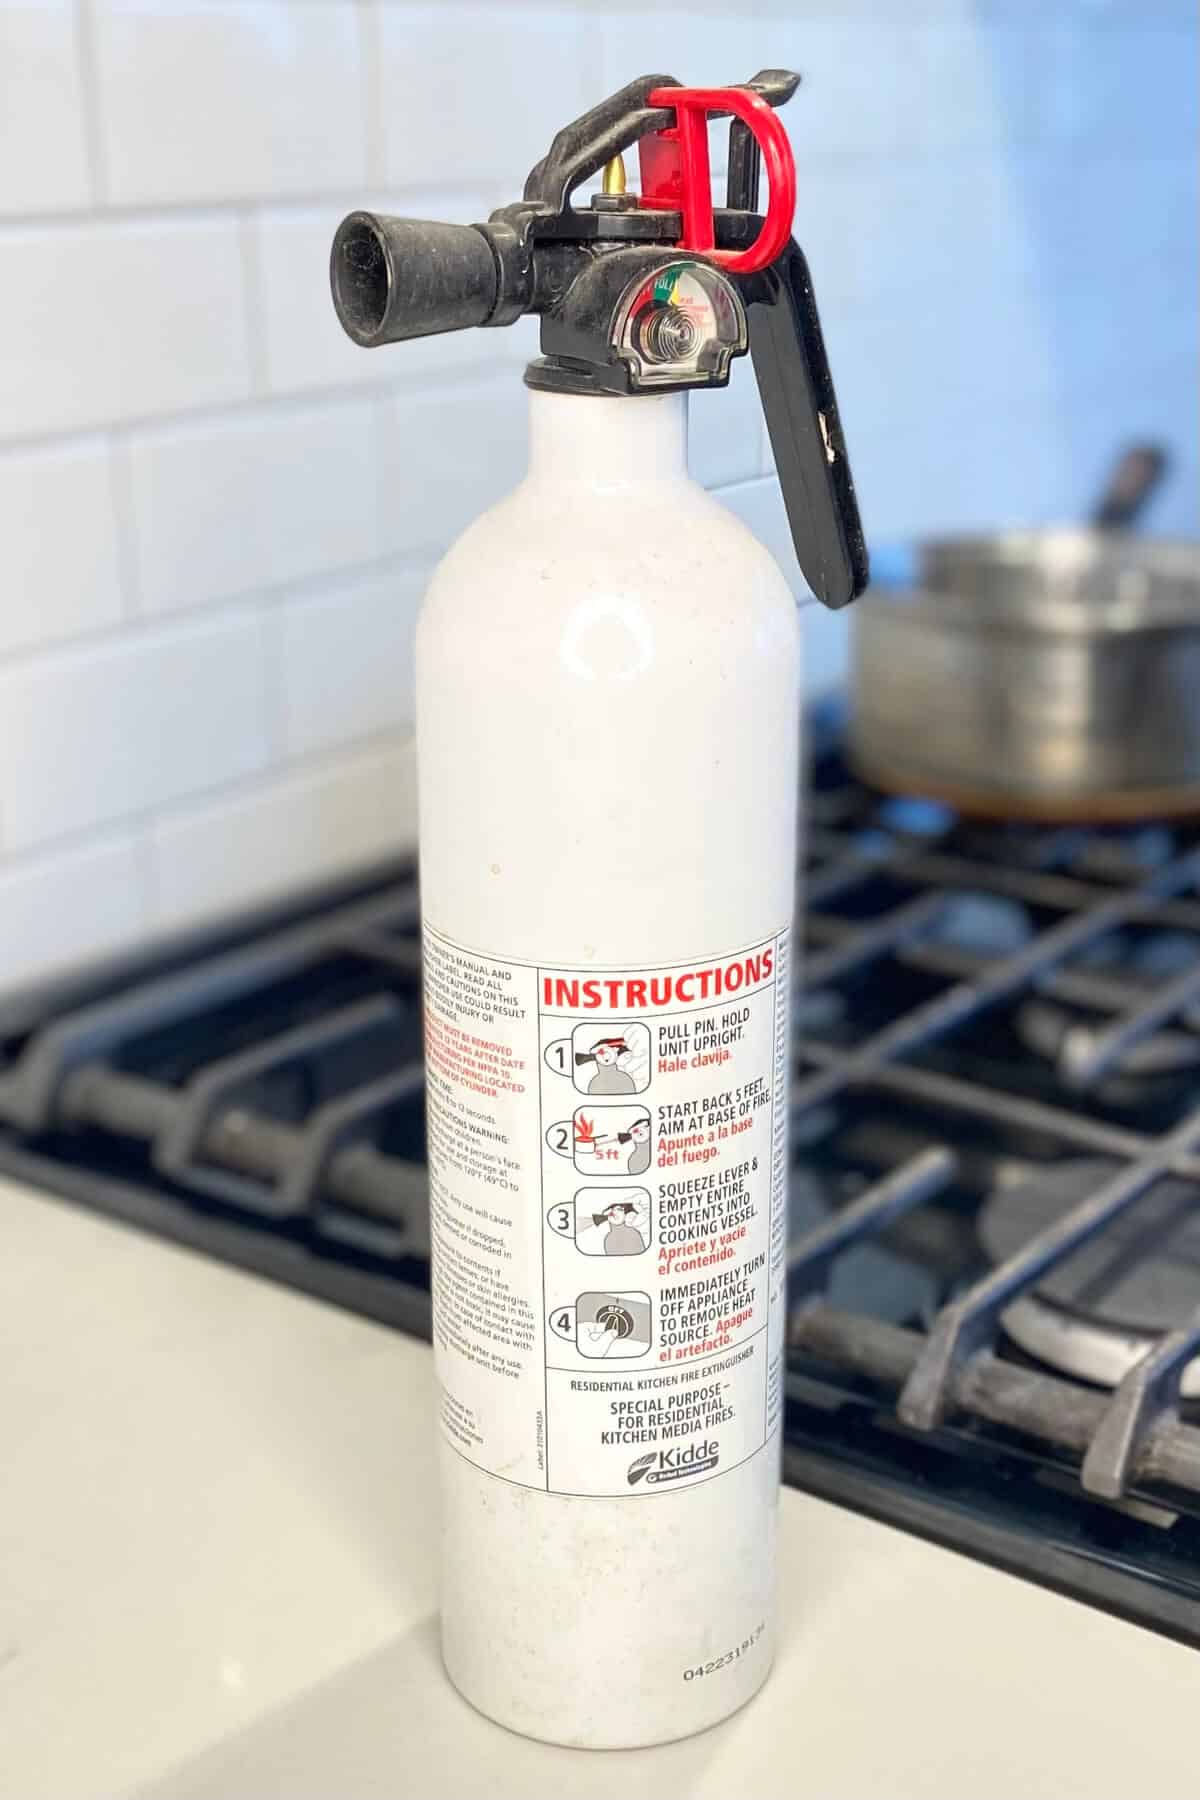 Fire extinguisher for safety.